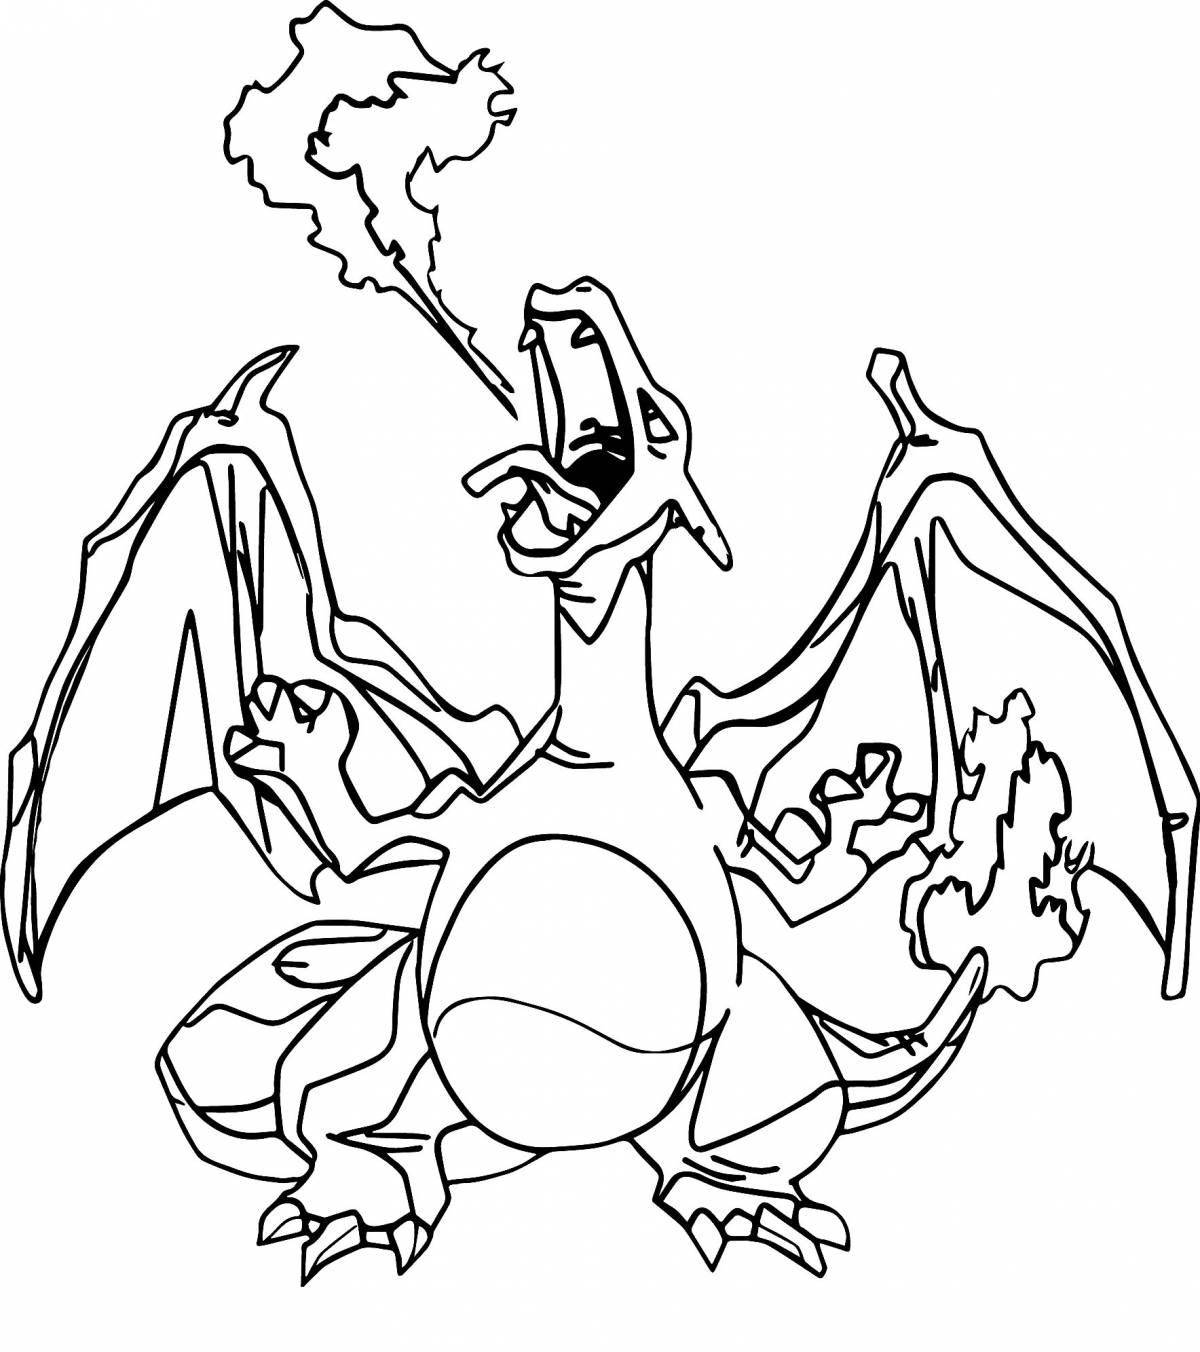 Charizard charming coloring book